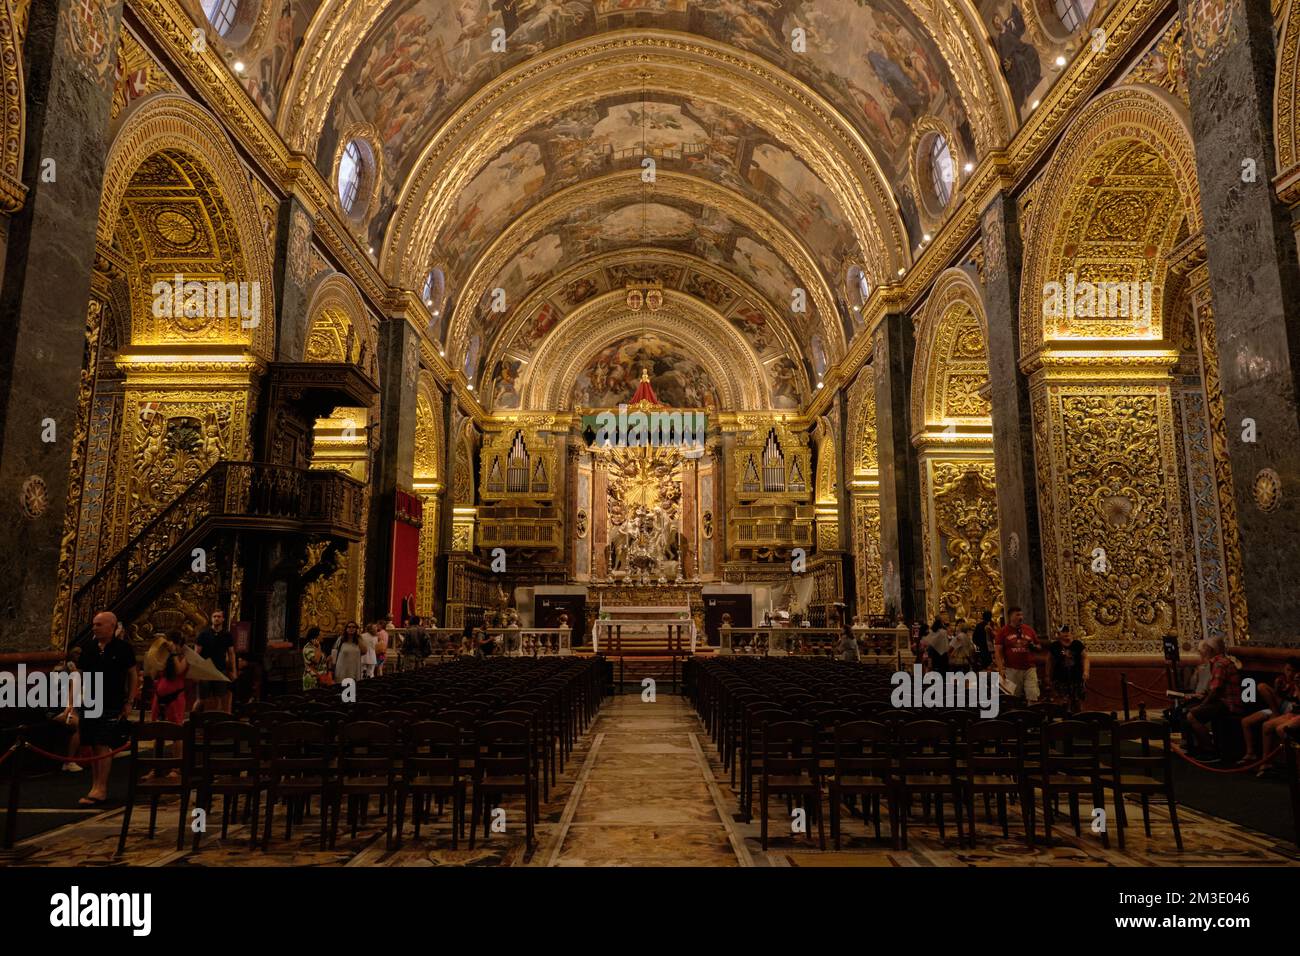 The nave of St. John's Co-Cathedral built by the Order of St. John between 1572 and 1577 - Valletta, Malta Stock Photo